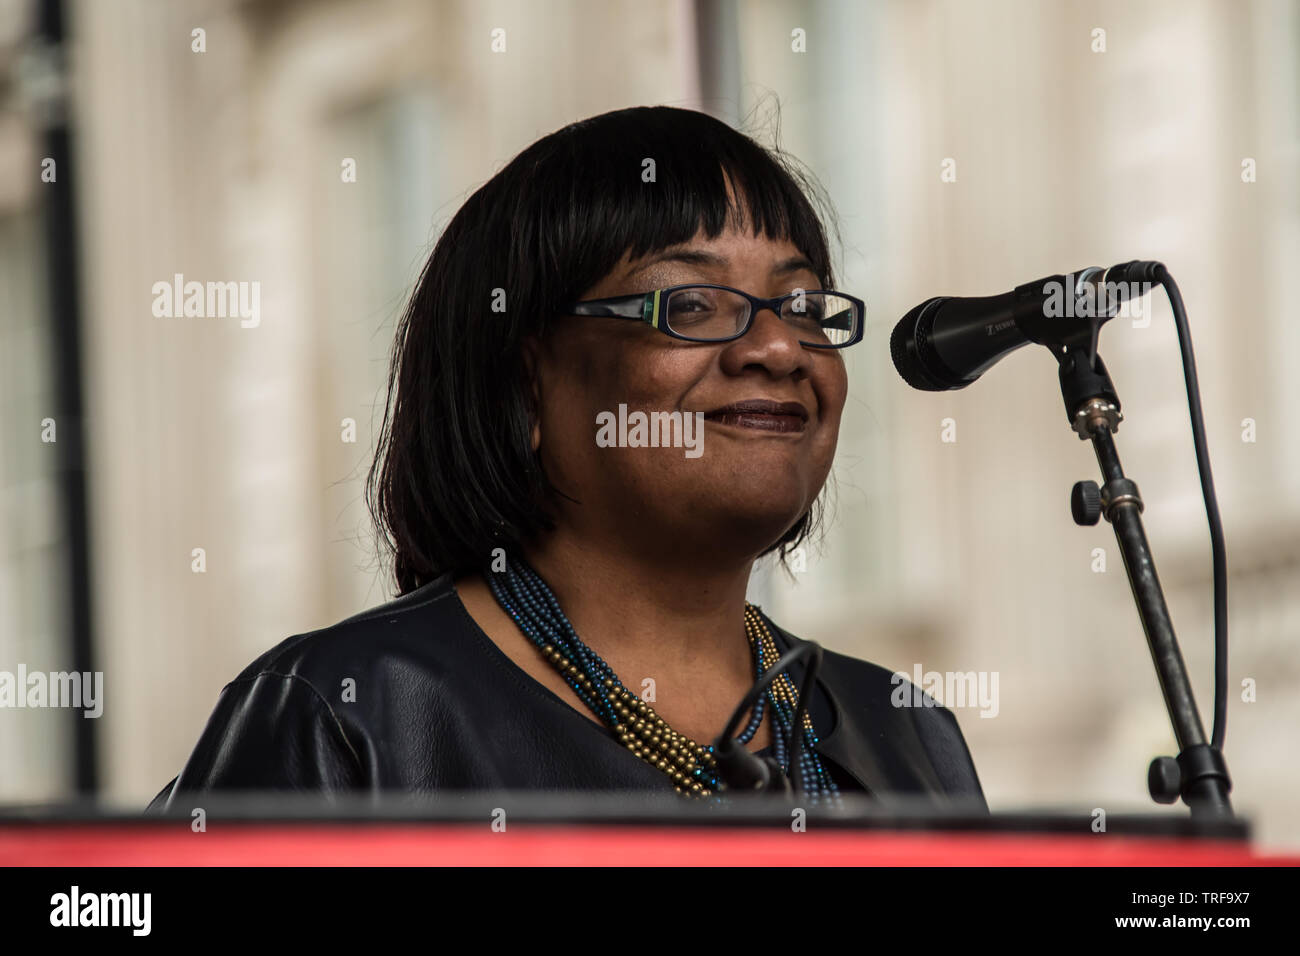 4 June ,2019.. London,UK. Diane Abbott, Labour MP and Shadow Home Secretary addresses the crowd on Whitehall. Tens of Thousands protest in Central London in a National demonstration against US President Donald Trumps State visit to the UK. Protesters rallied in Trafalgar Square before marching down Whitehall to Downing Street, where Trump was meeting UK Prime Minister Theresa May. David Rowe/Alamy Live News. Stock Photo